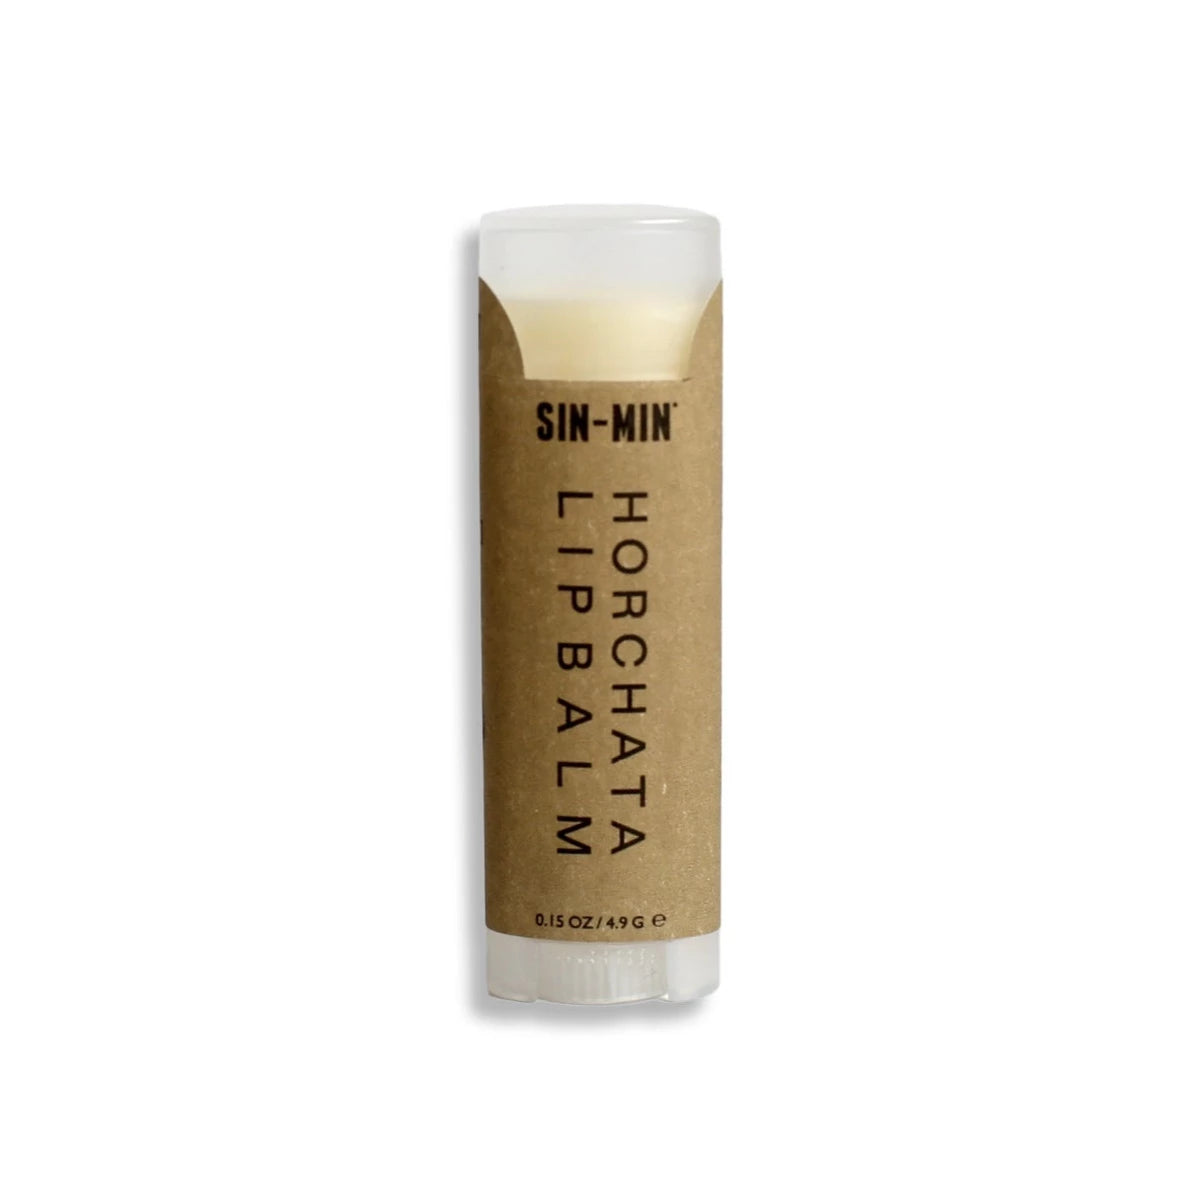 Branded horchata (sweet rice water) lip balm stick.